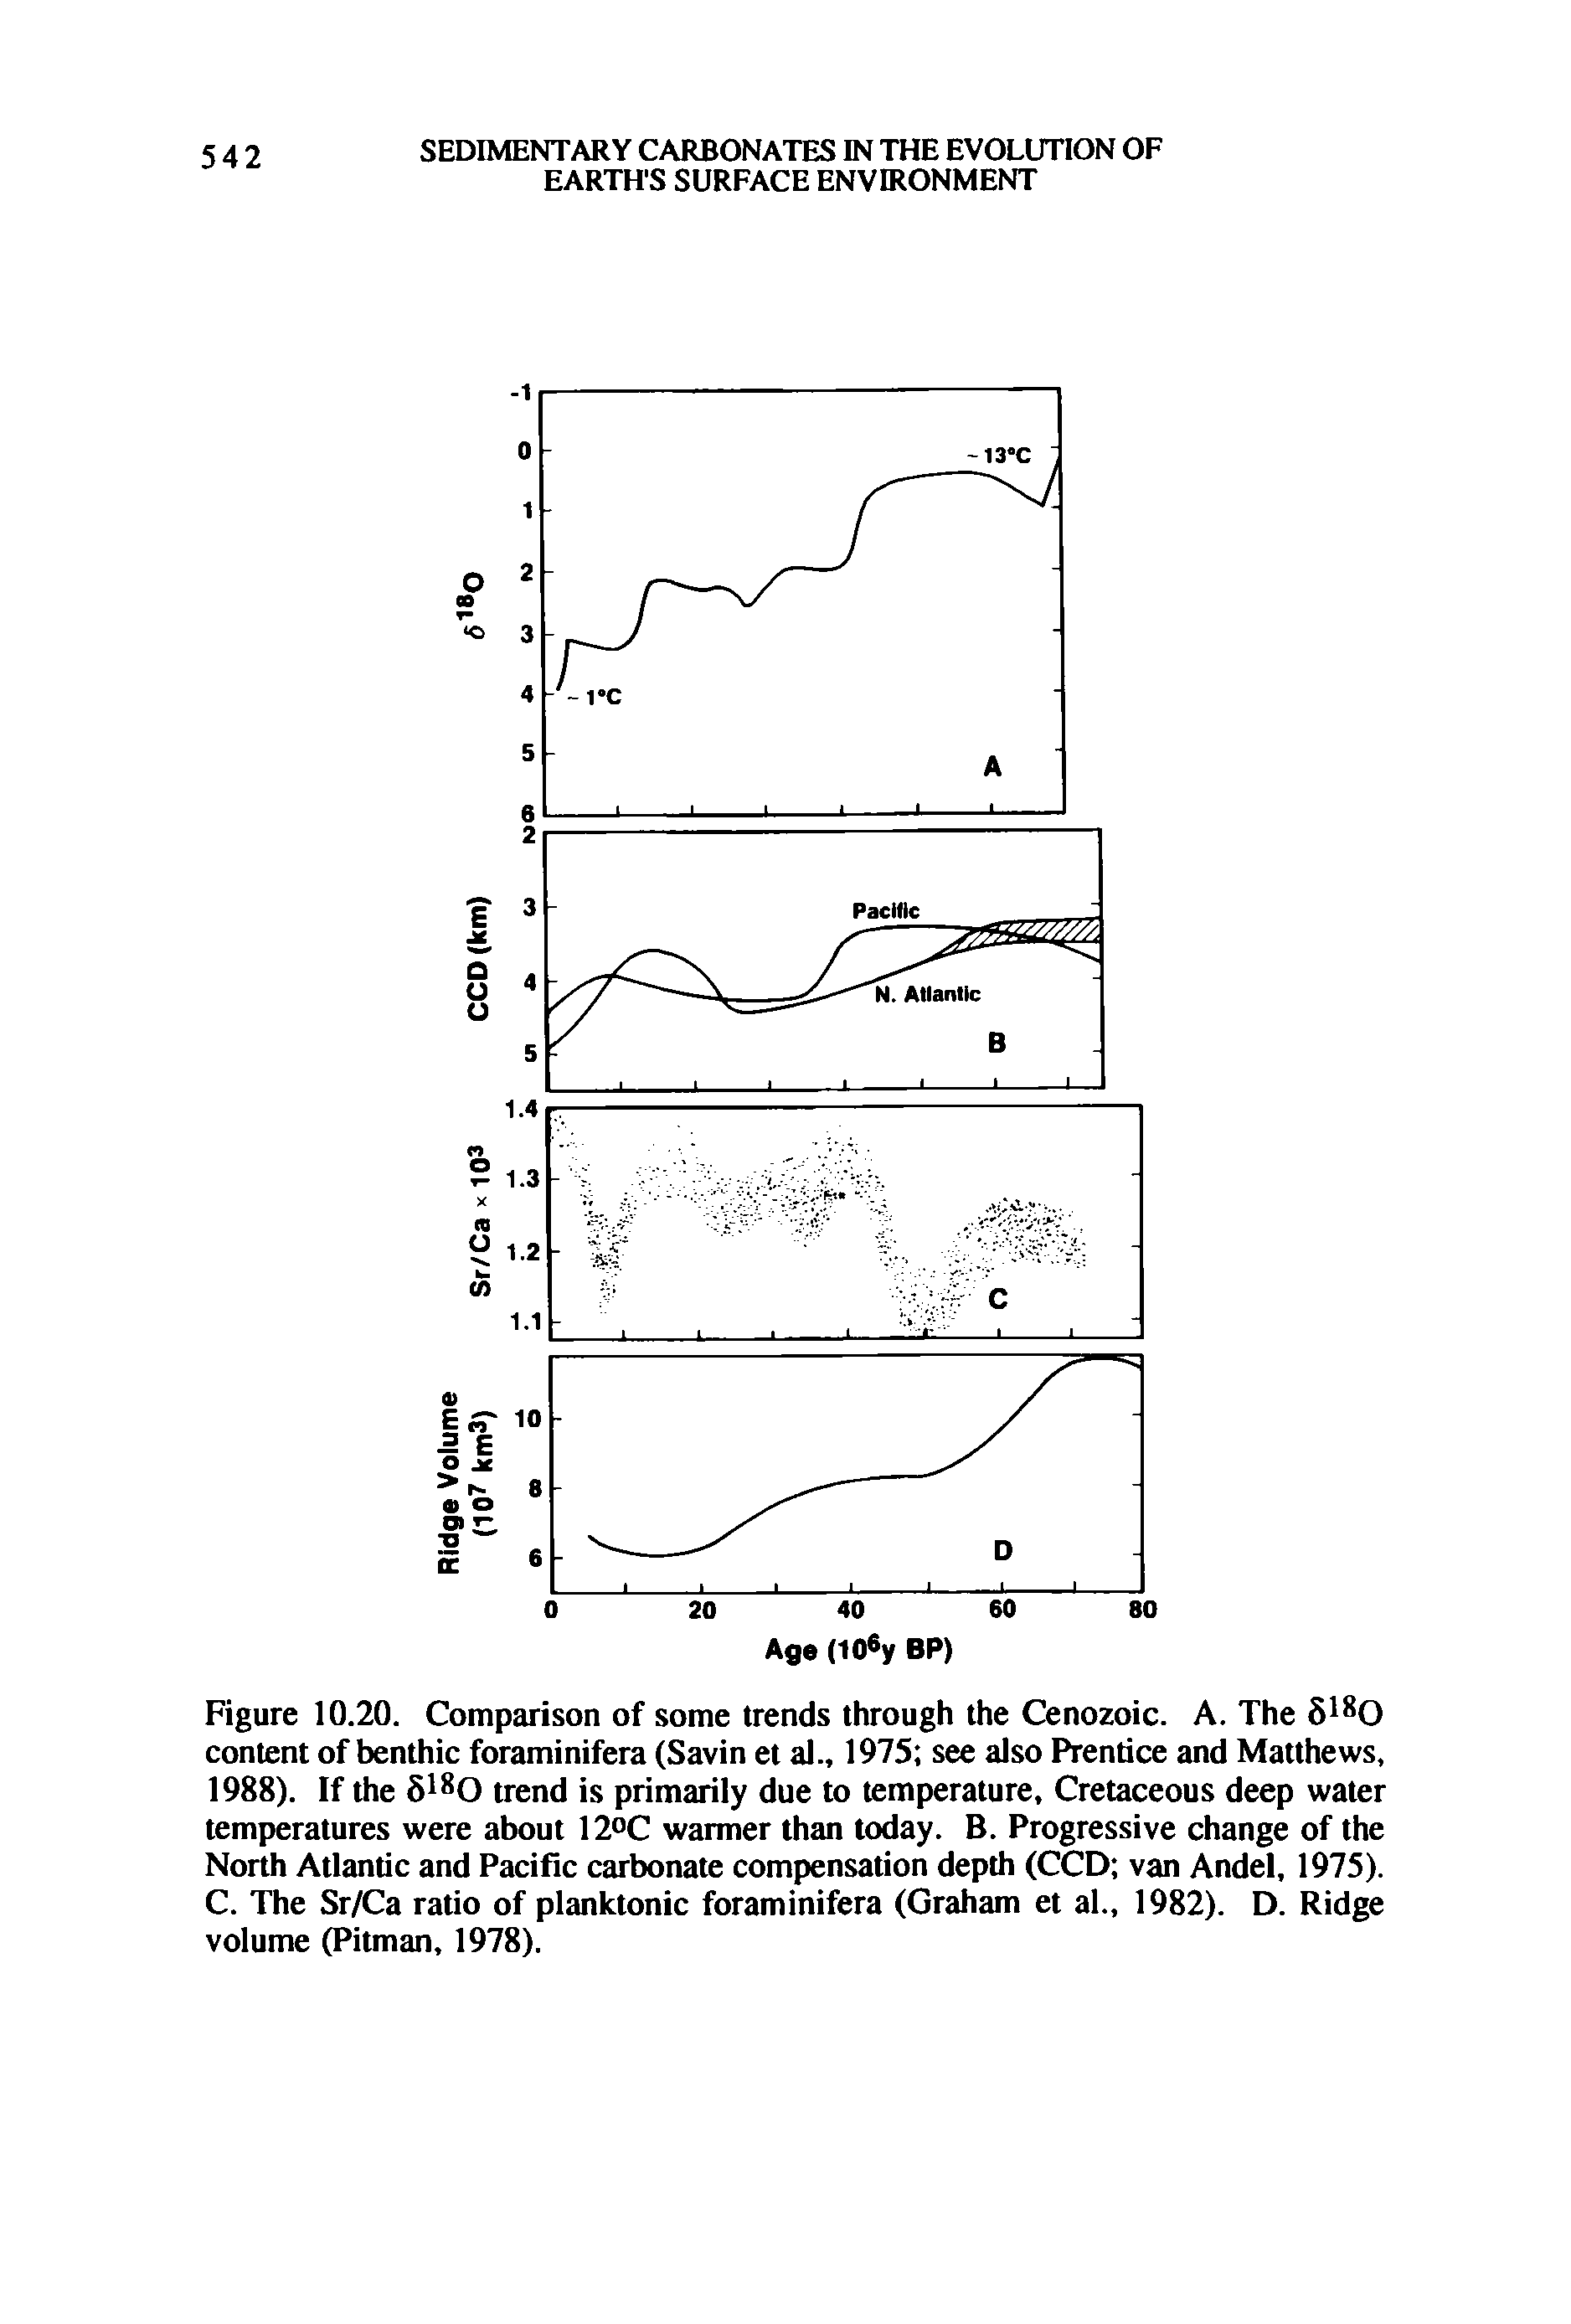 Figure 10.20. Comparison of some trends through the Cenozoic. A. The 8180 content of benthic foraminifera (Savin et al., 1975 see also Prentice and Matthews, 1988). If the 5180 trend is primarily due to temperature, Cretaceous deep water temperatures were about 12°C warmer than today. B. Progressive change of the North Atlantic and Pacific carbonate compensation depth (CCD van Andel, 1975). C. The Sr/Ca ratio of planktonic foraminifera (Graham et al., 1982). D. Ridge volume (Pitman, 1978).